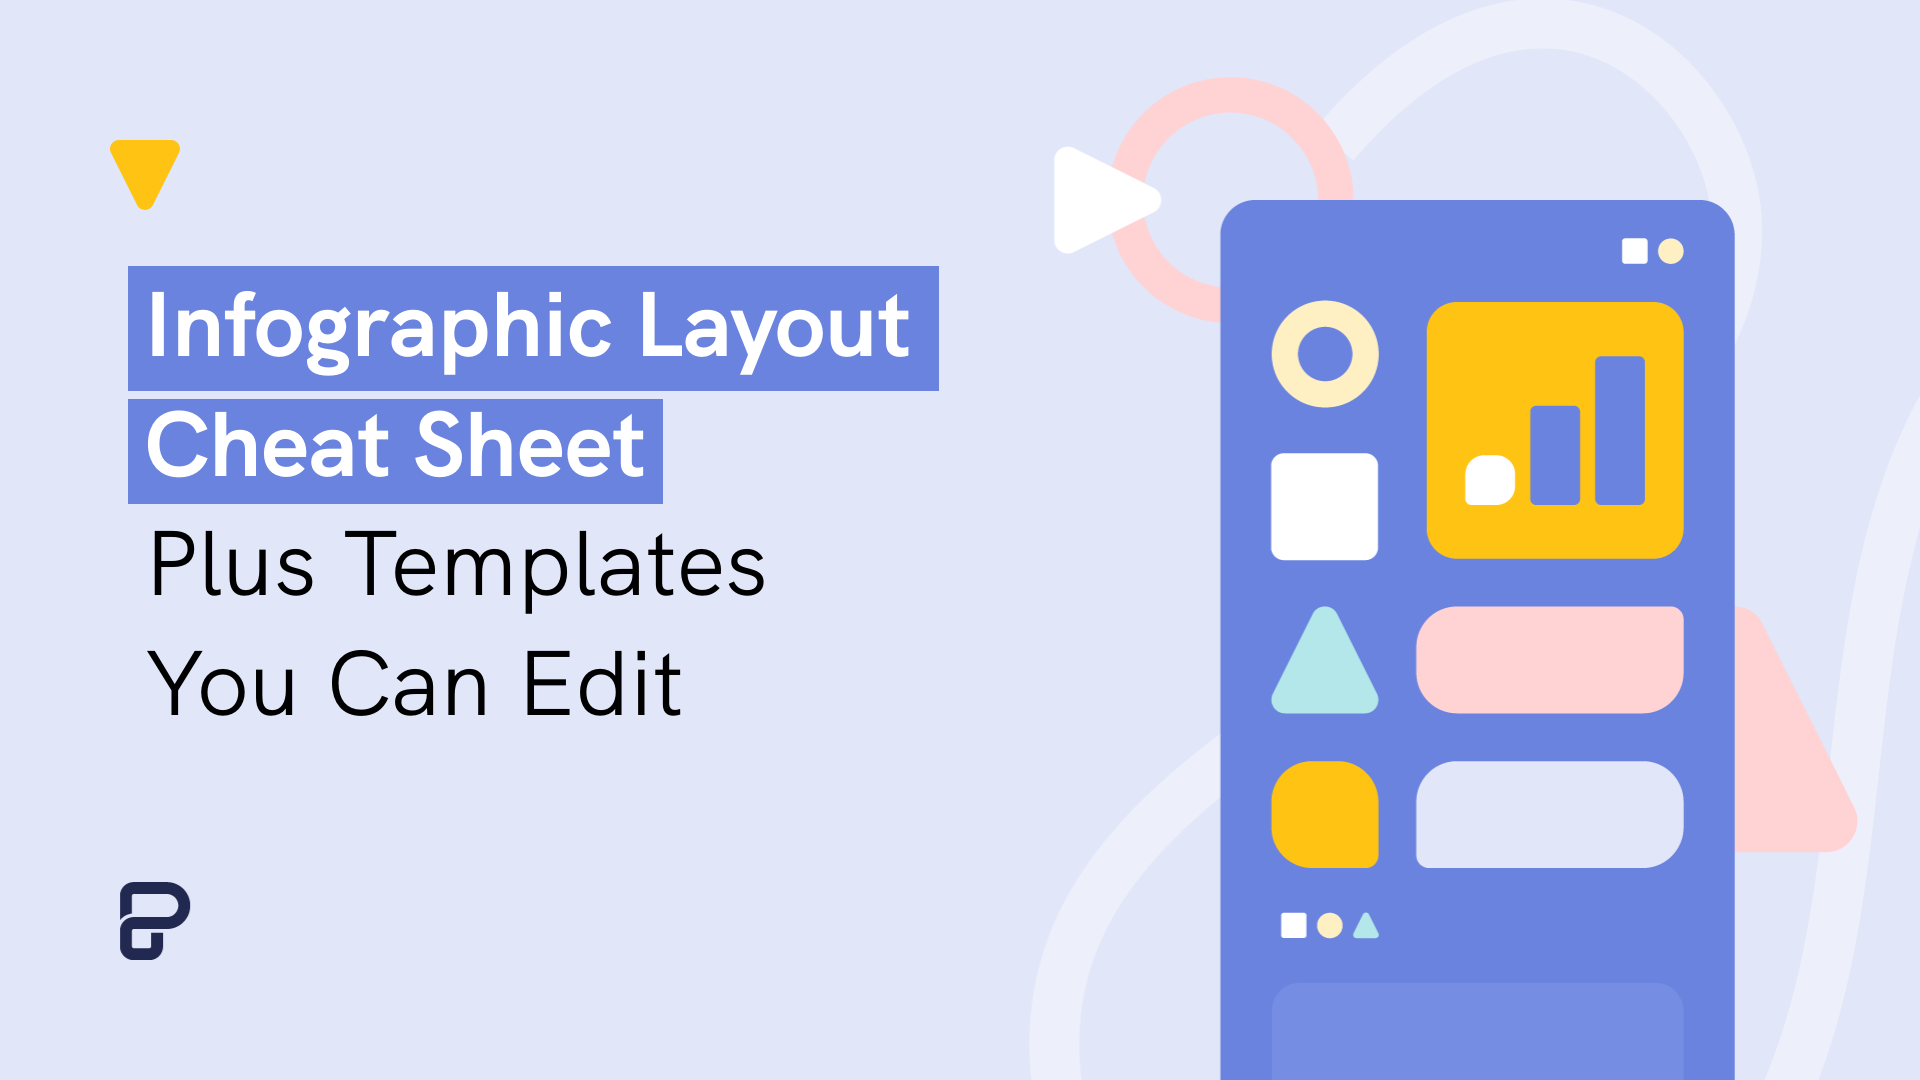 featured image for infographic layout cheat sheet